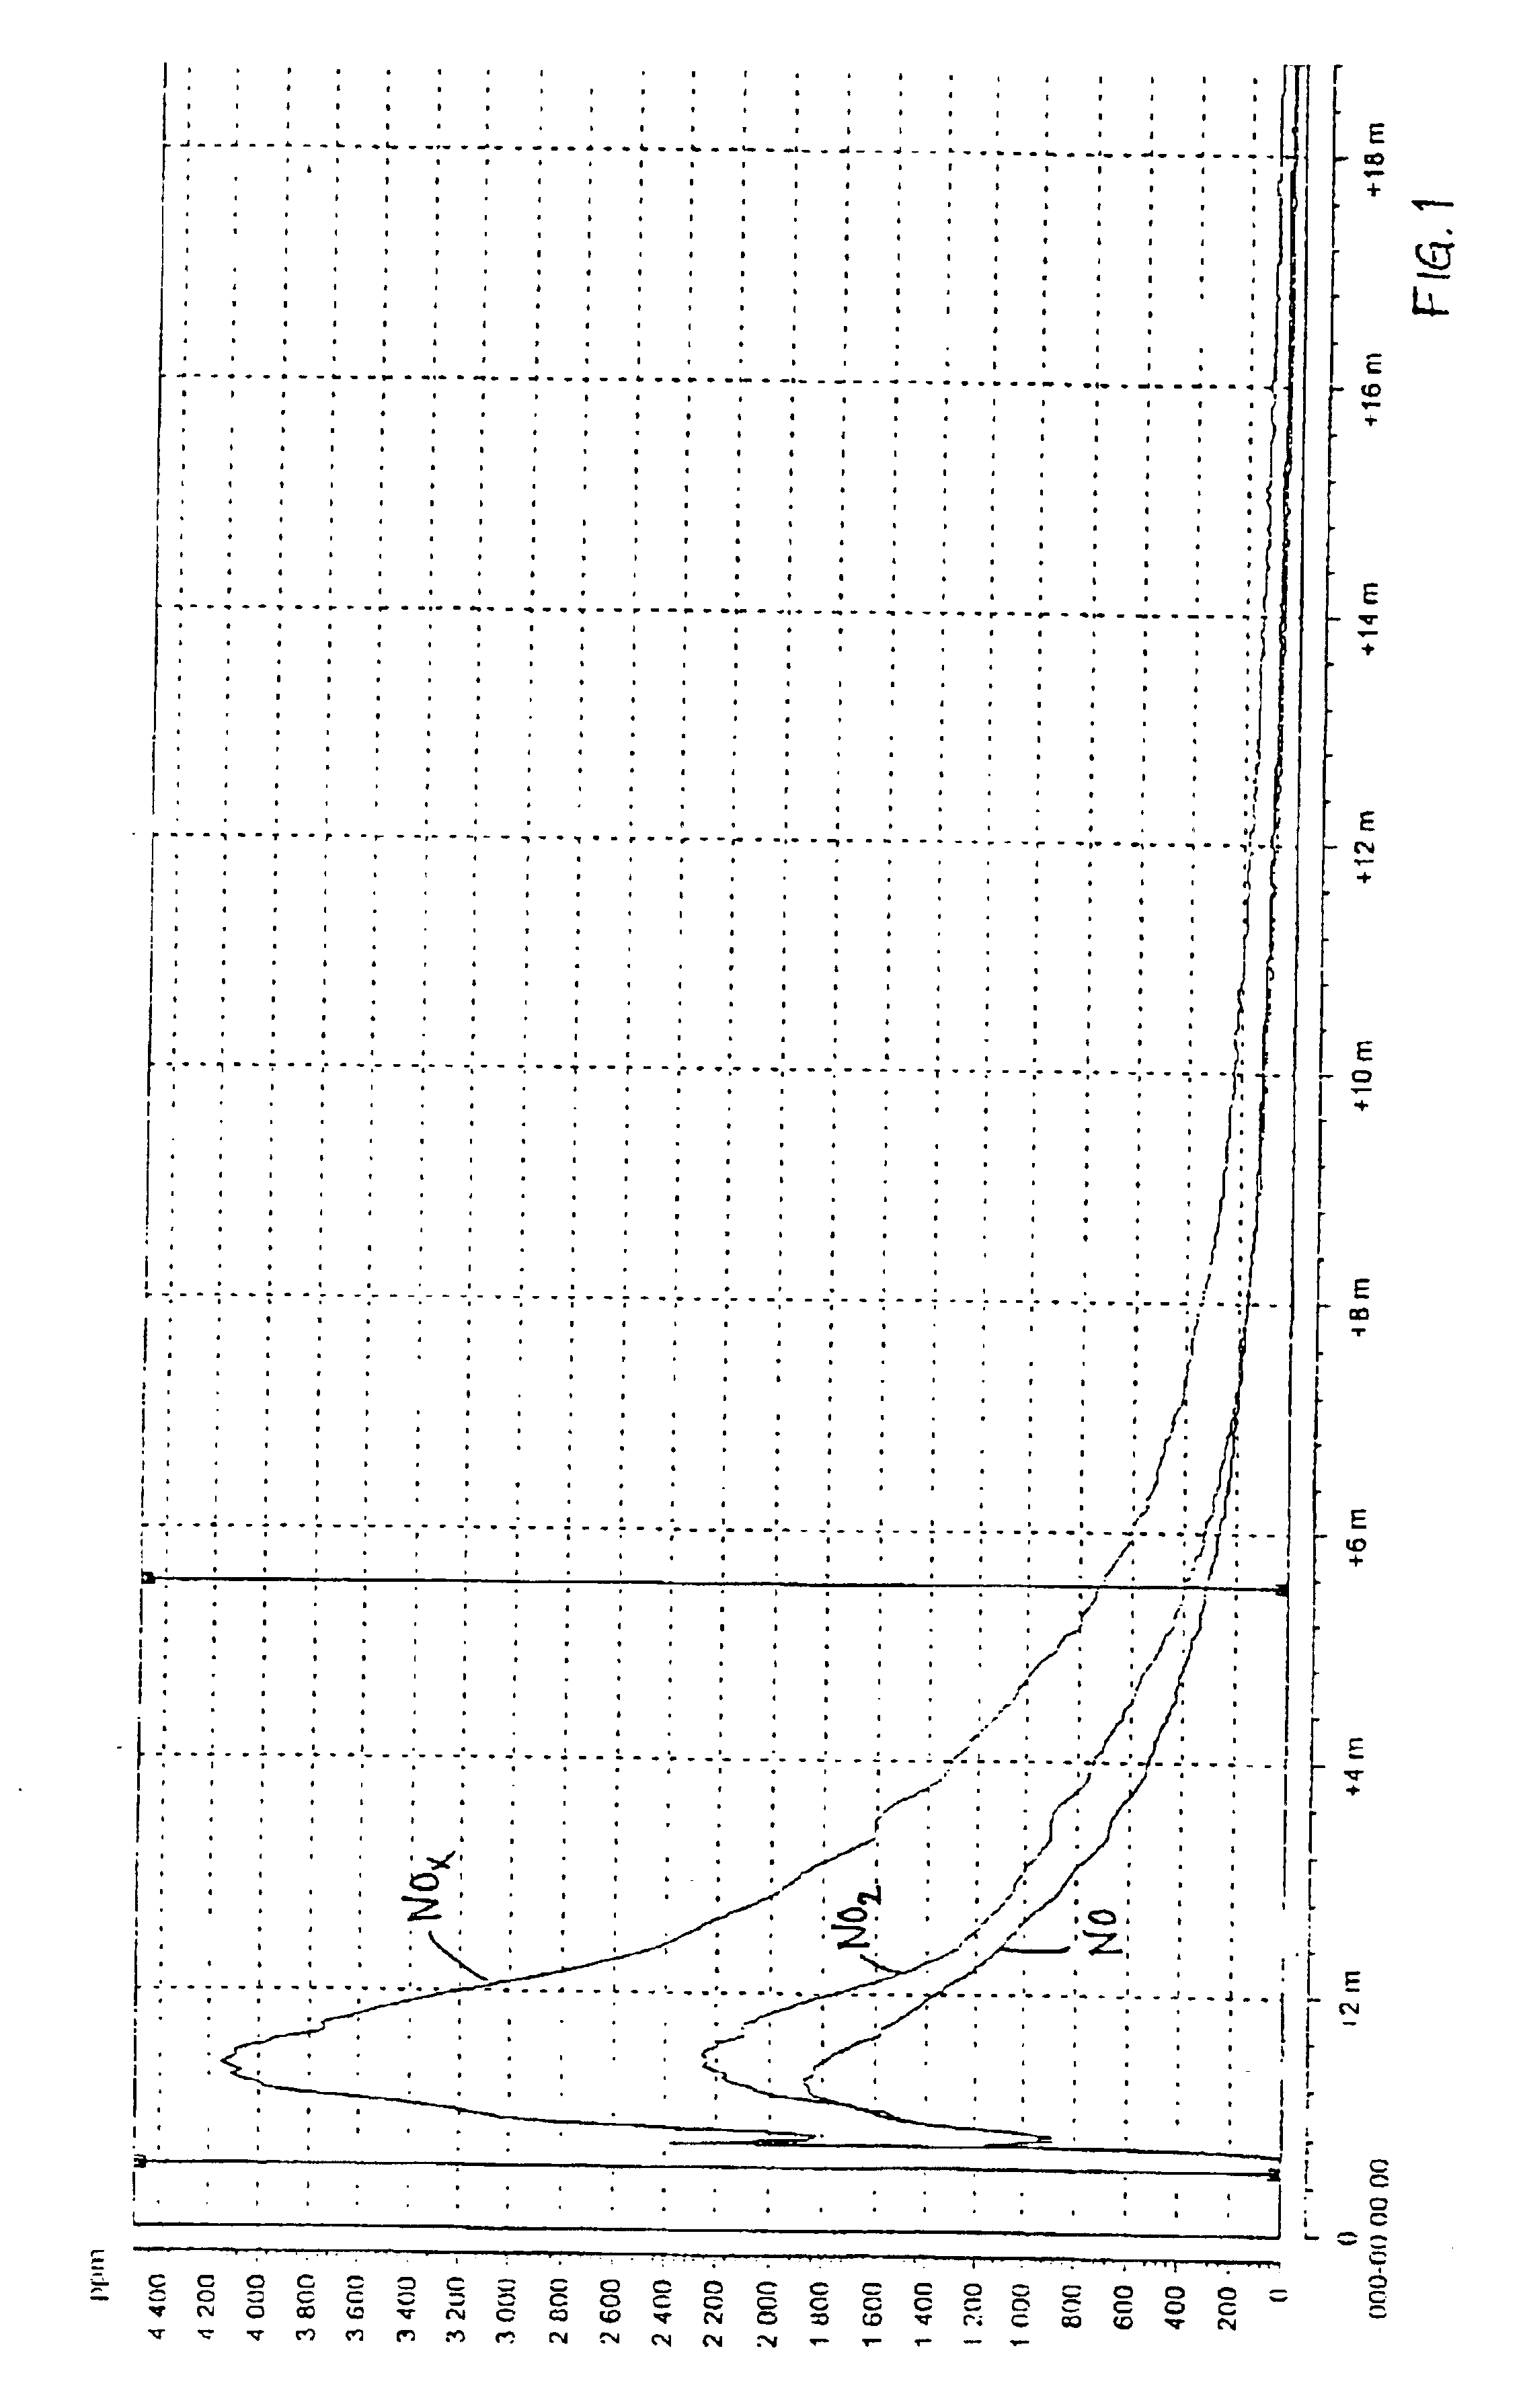 Pickling agent containing urea and method of producing it